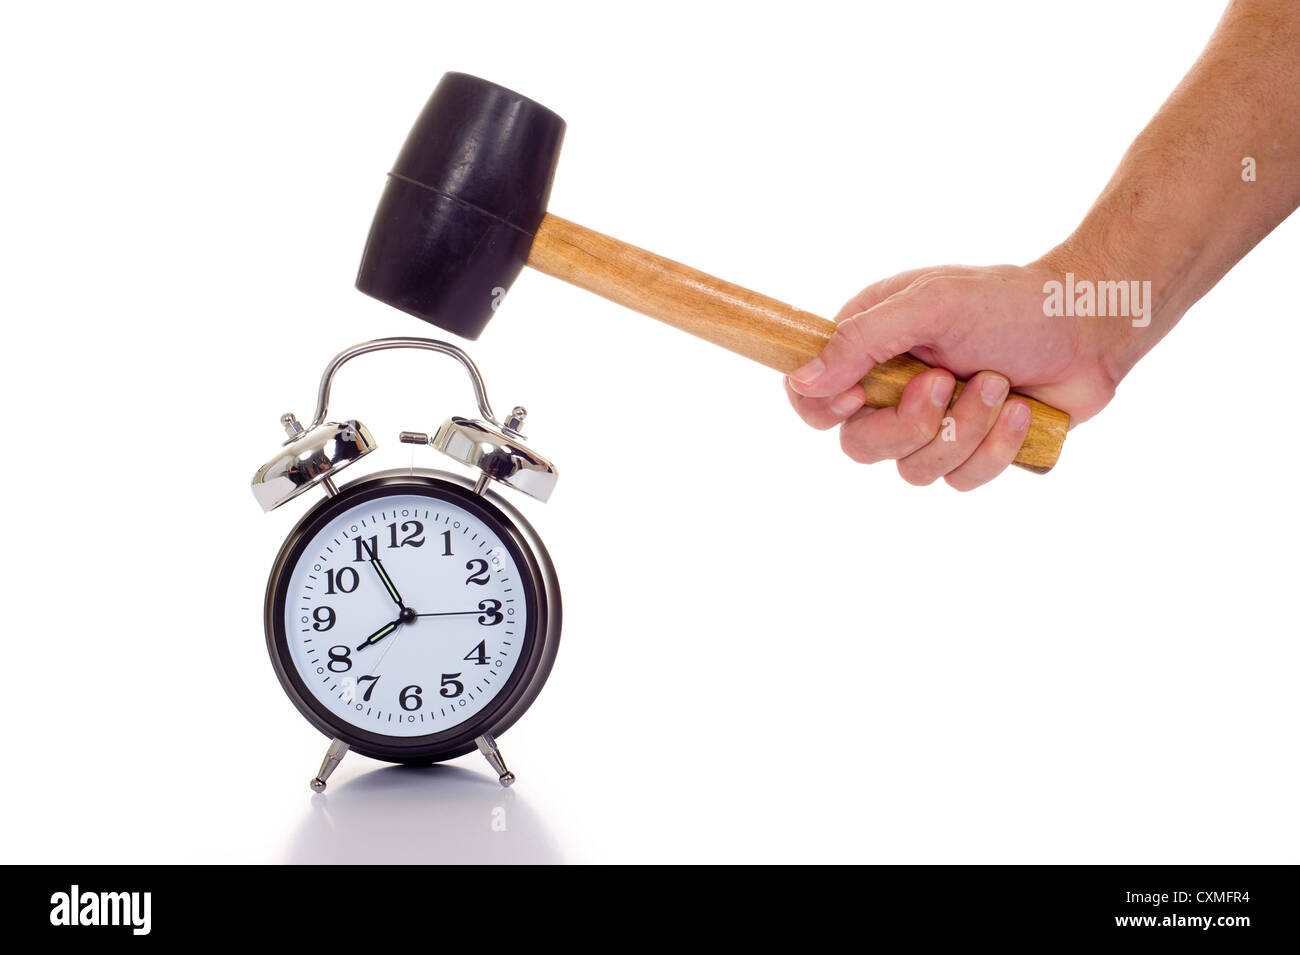 a hand holding a black mallet or hammer about to crush an old fashioned alarm clock on a white background, time concept Stock Photo